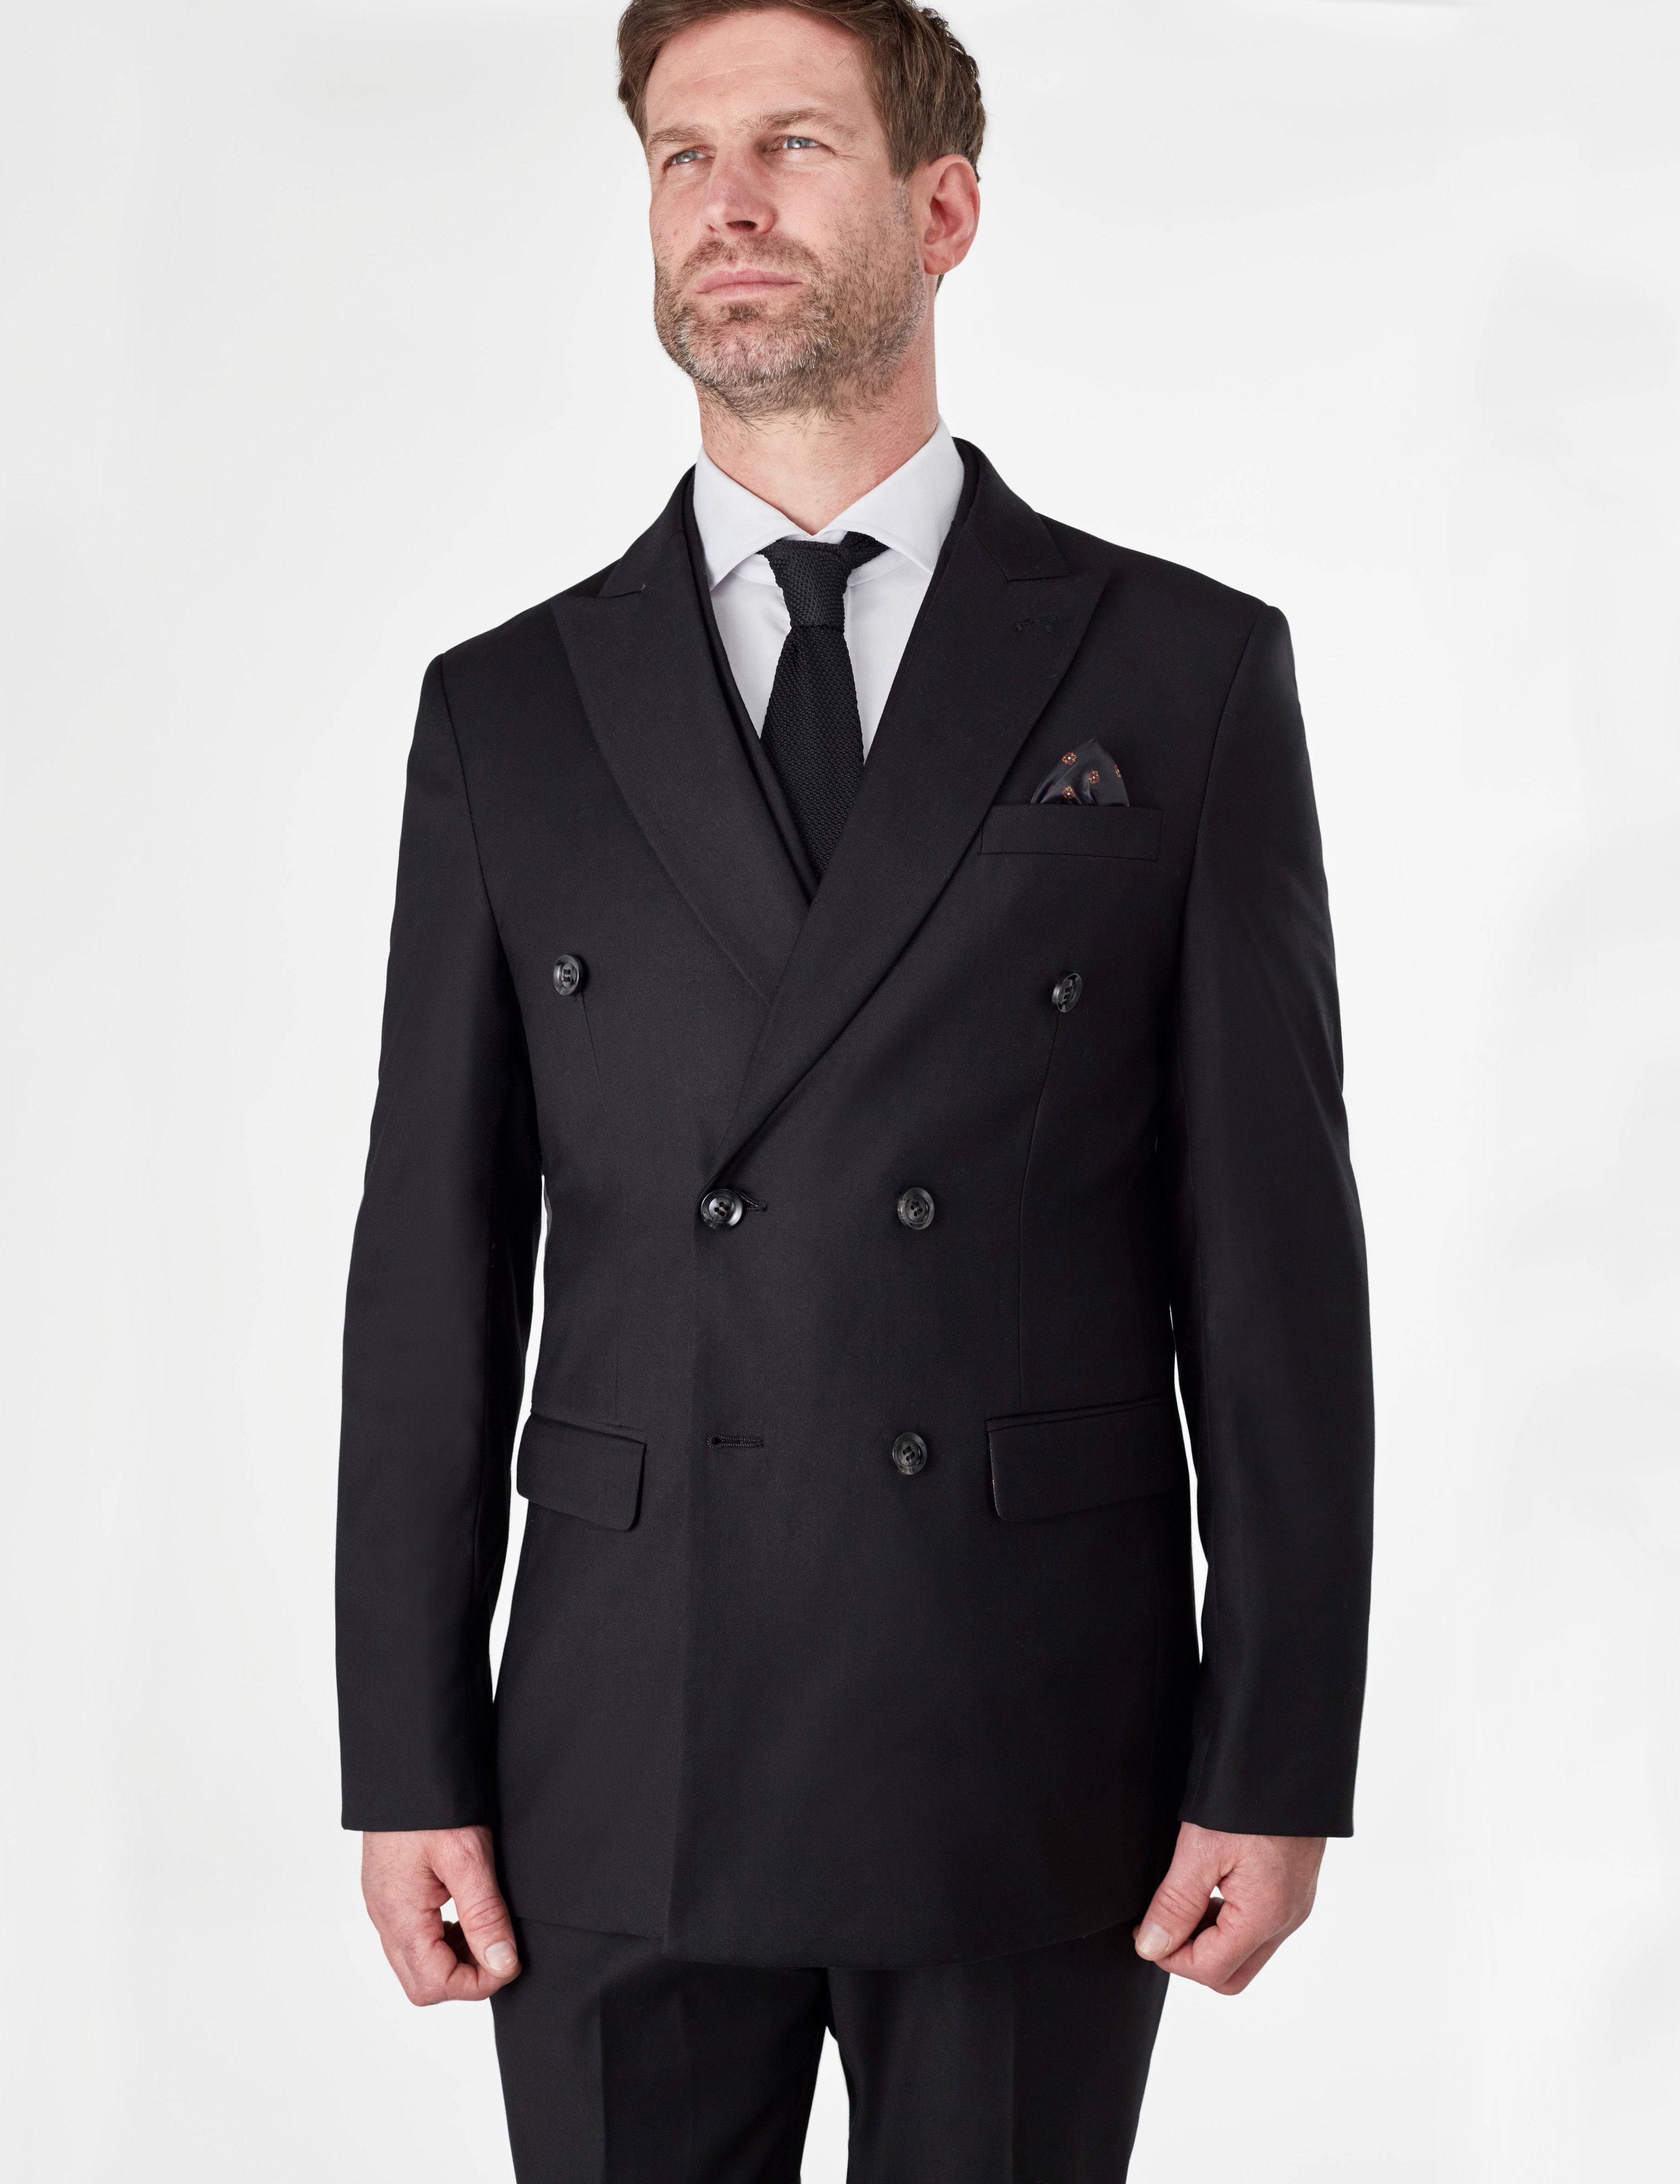 GRAHAM - BLACK DOUBLE BREASTED SUIT